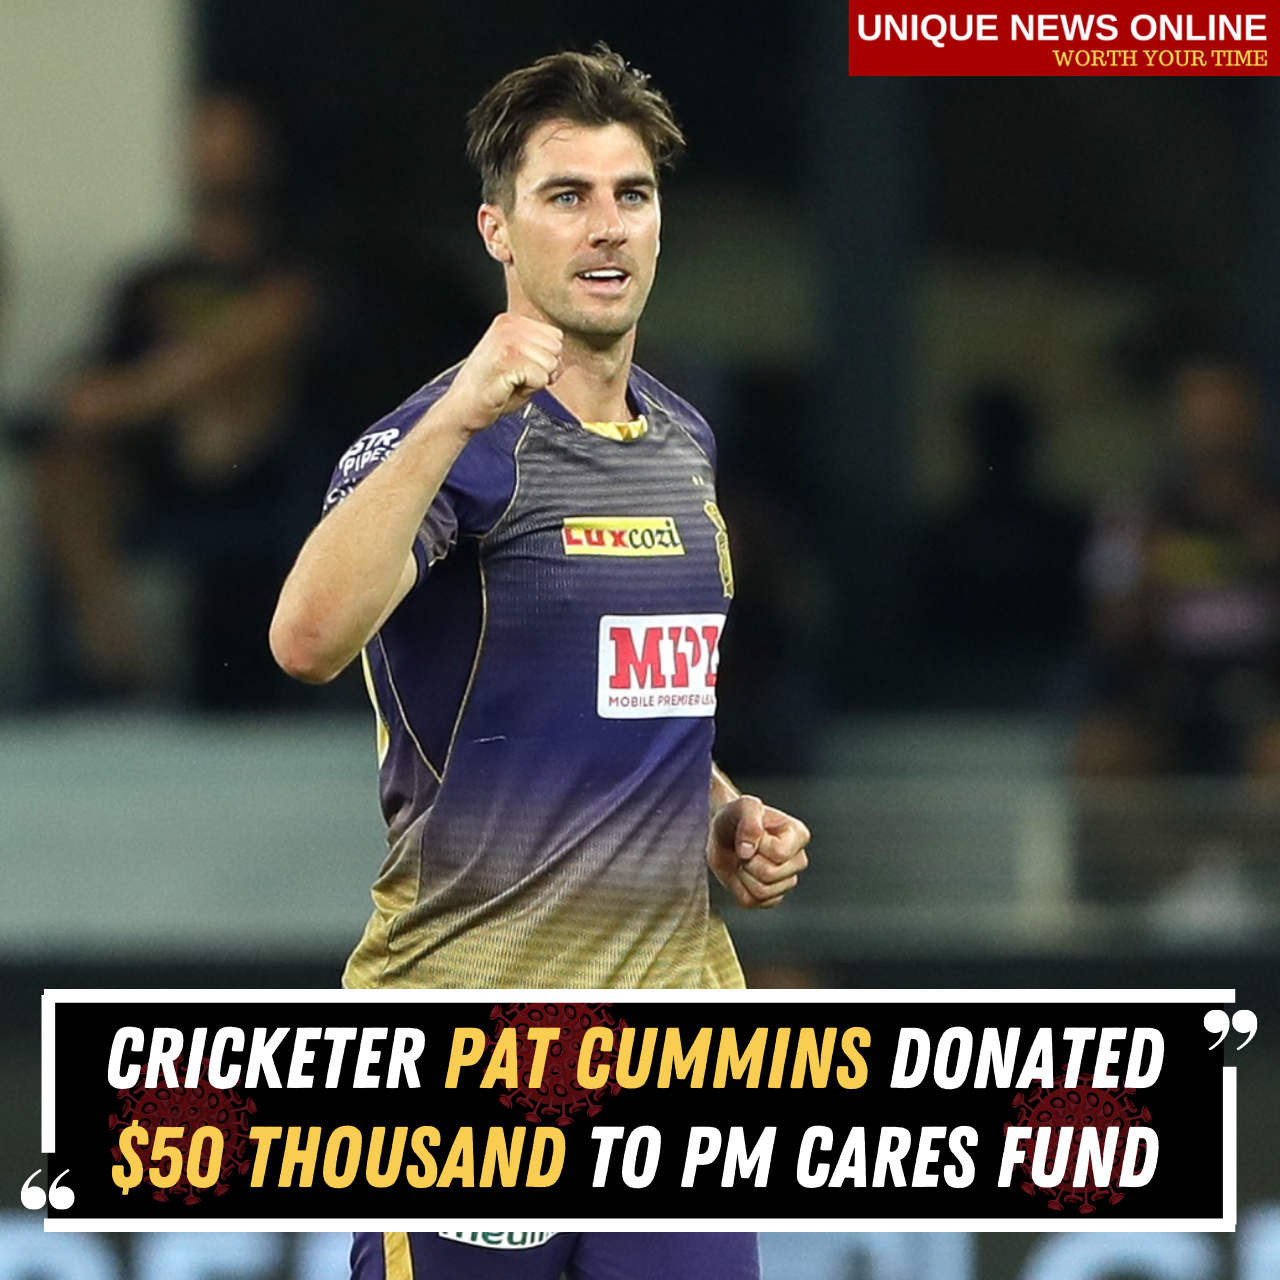 Cricketer Pat Cummins donated $50 thousand to PM Cares Fund